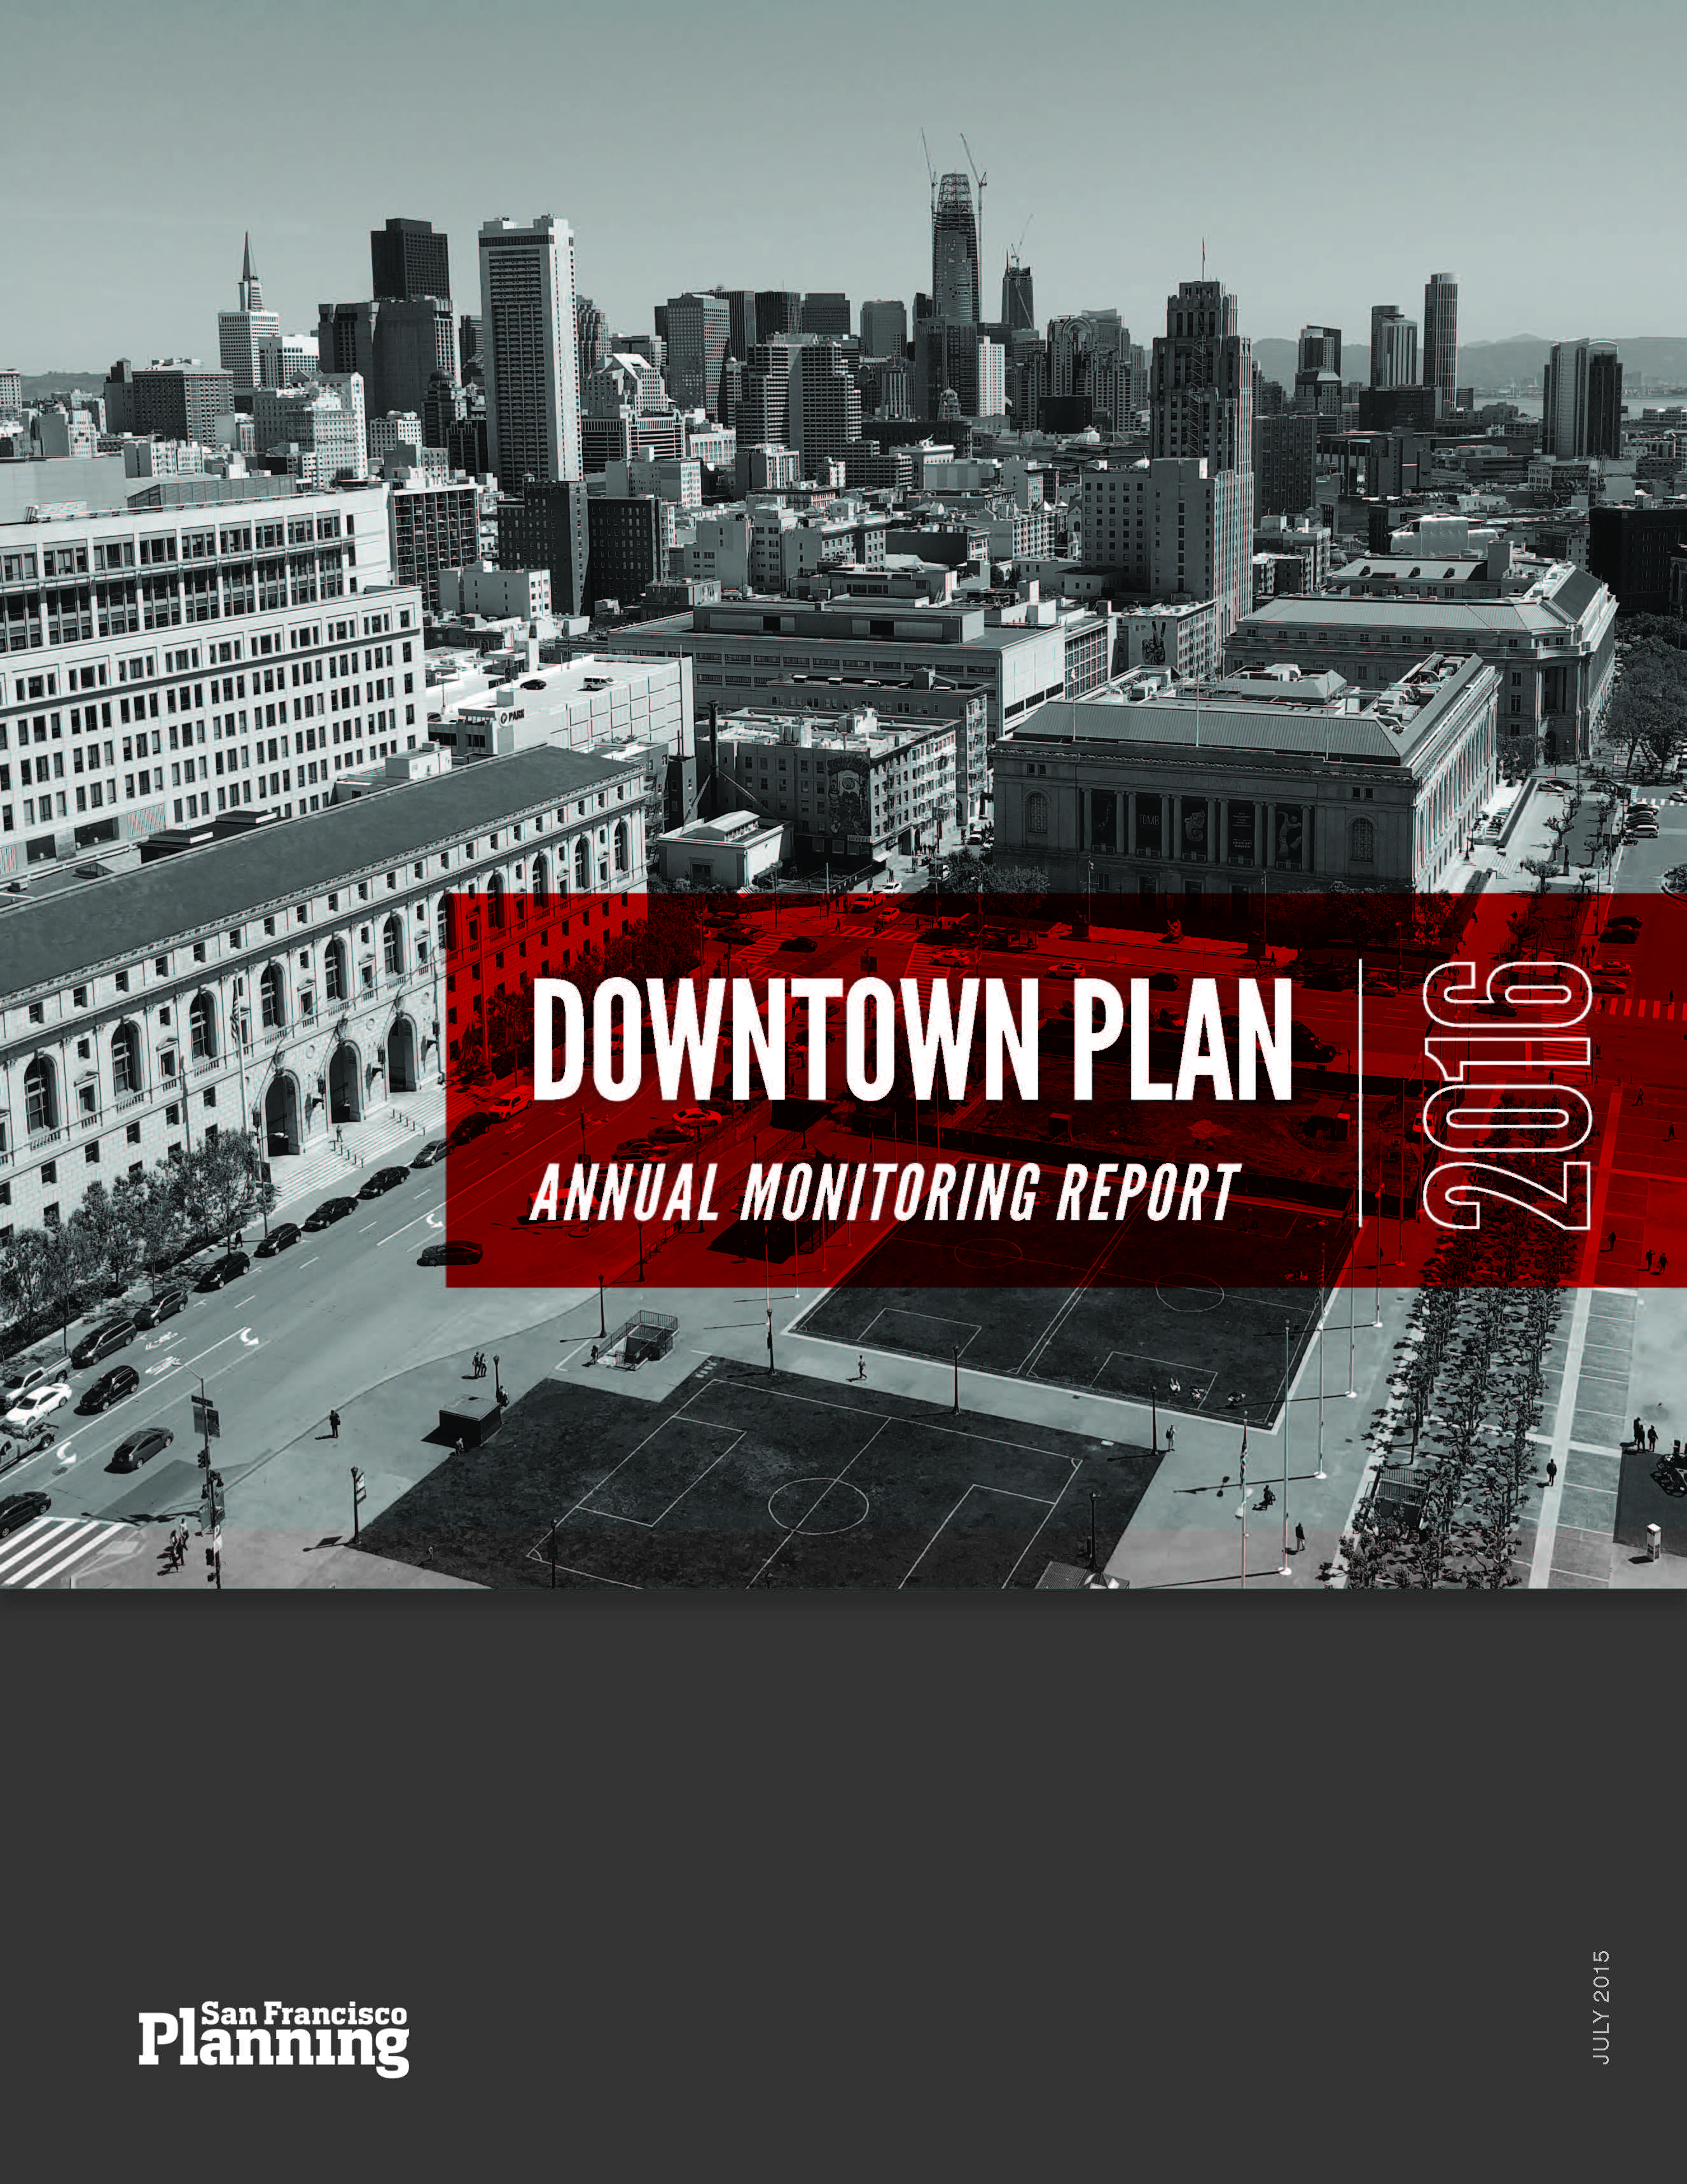 Cover Image for the Downtown Plan Monitoring Report 2016